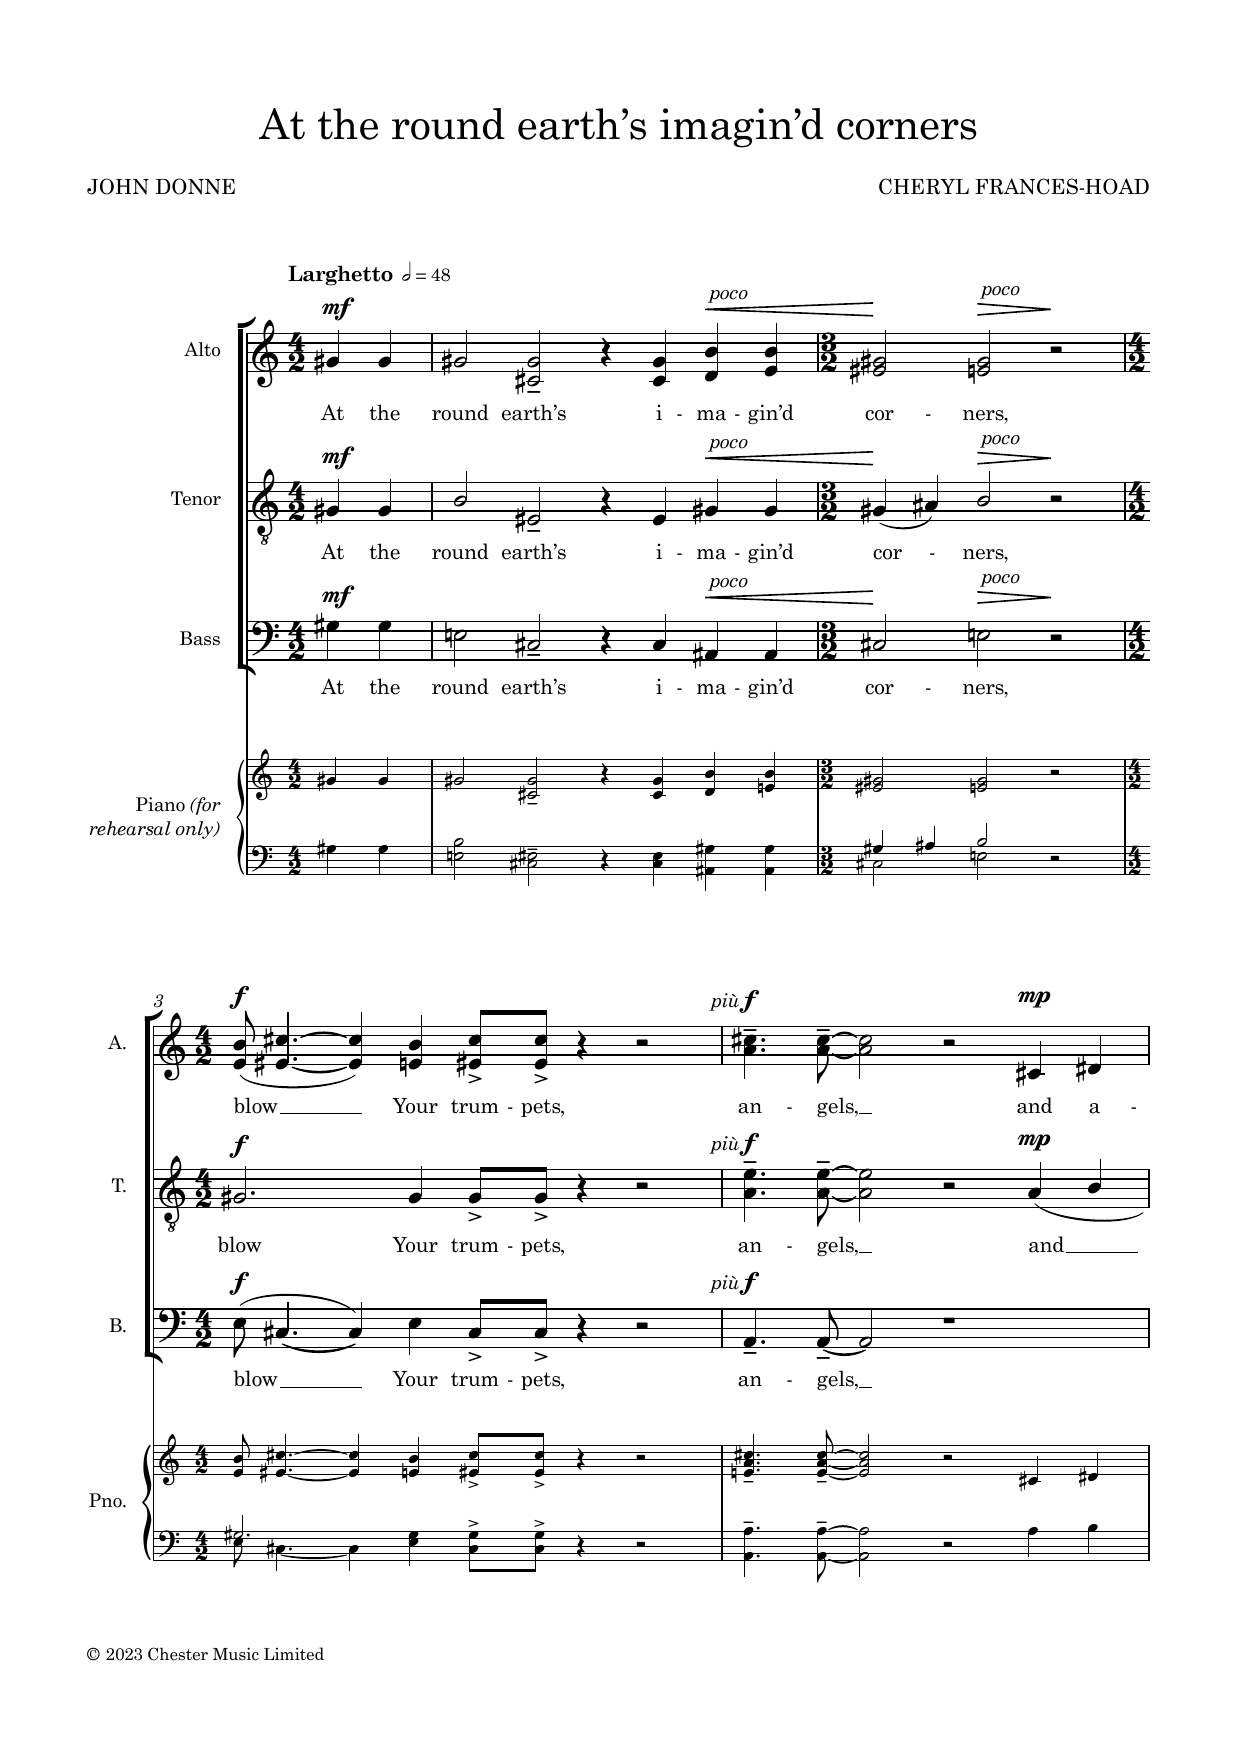 Cheryl Frances-Hoad At the round earth's imagin'd corners sheet music notes printable PDF score